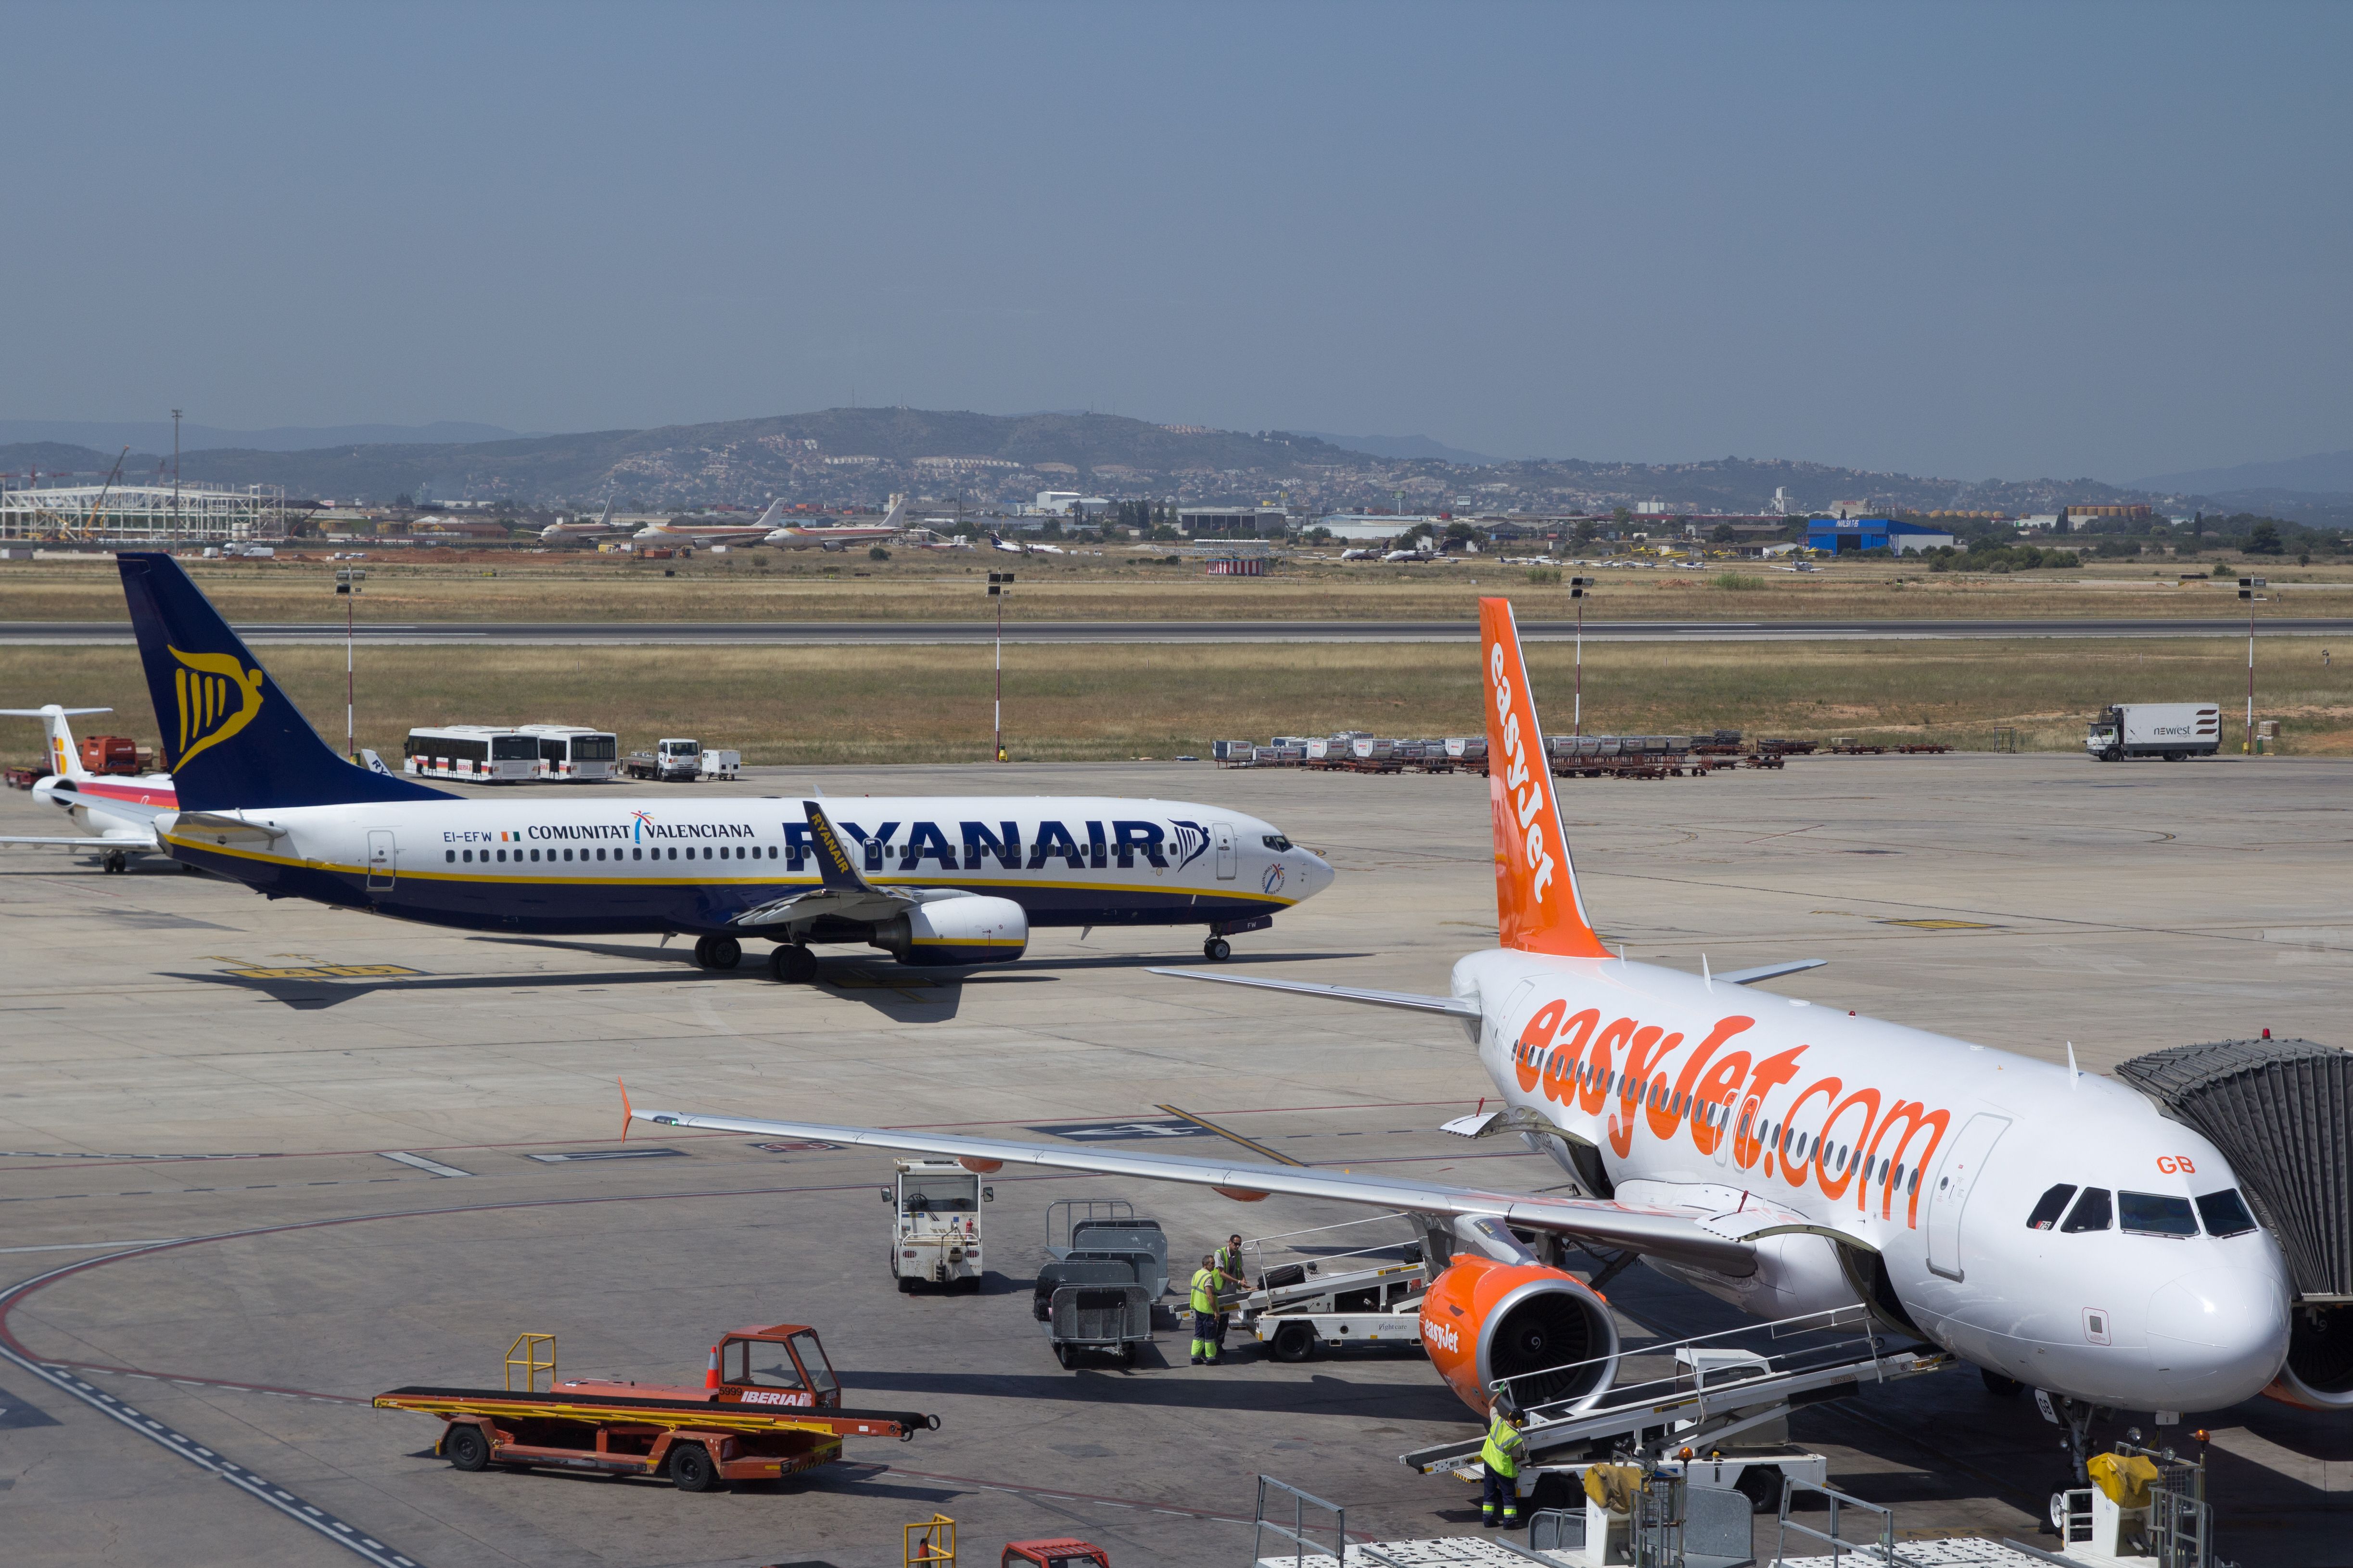 Ryanair and easyJet planes at an airport.